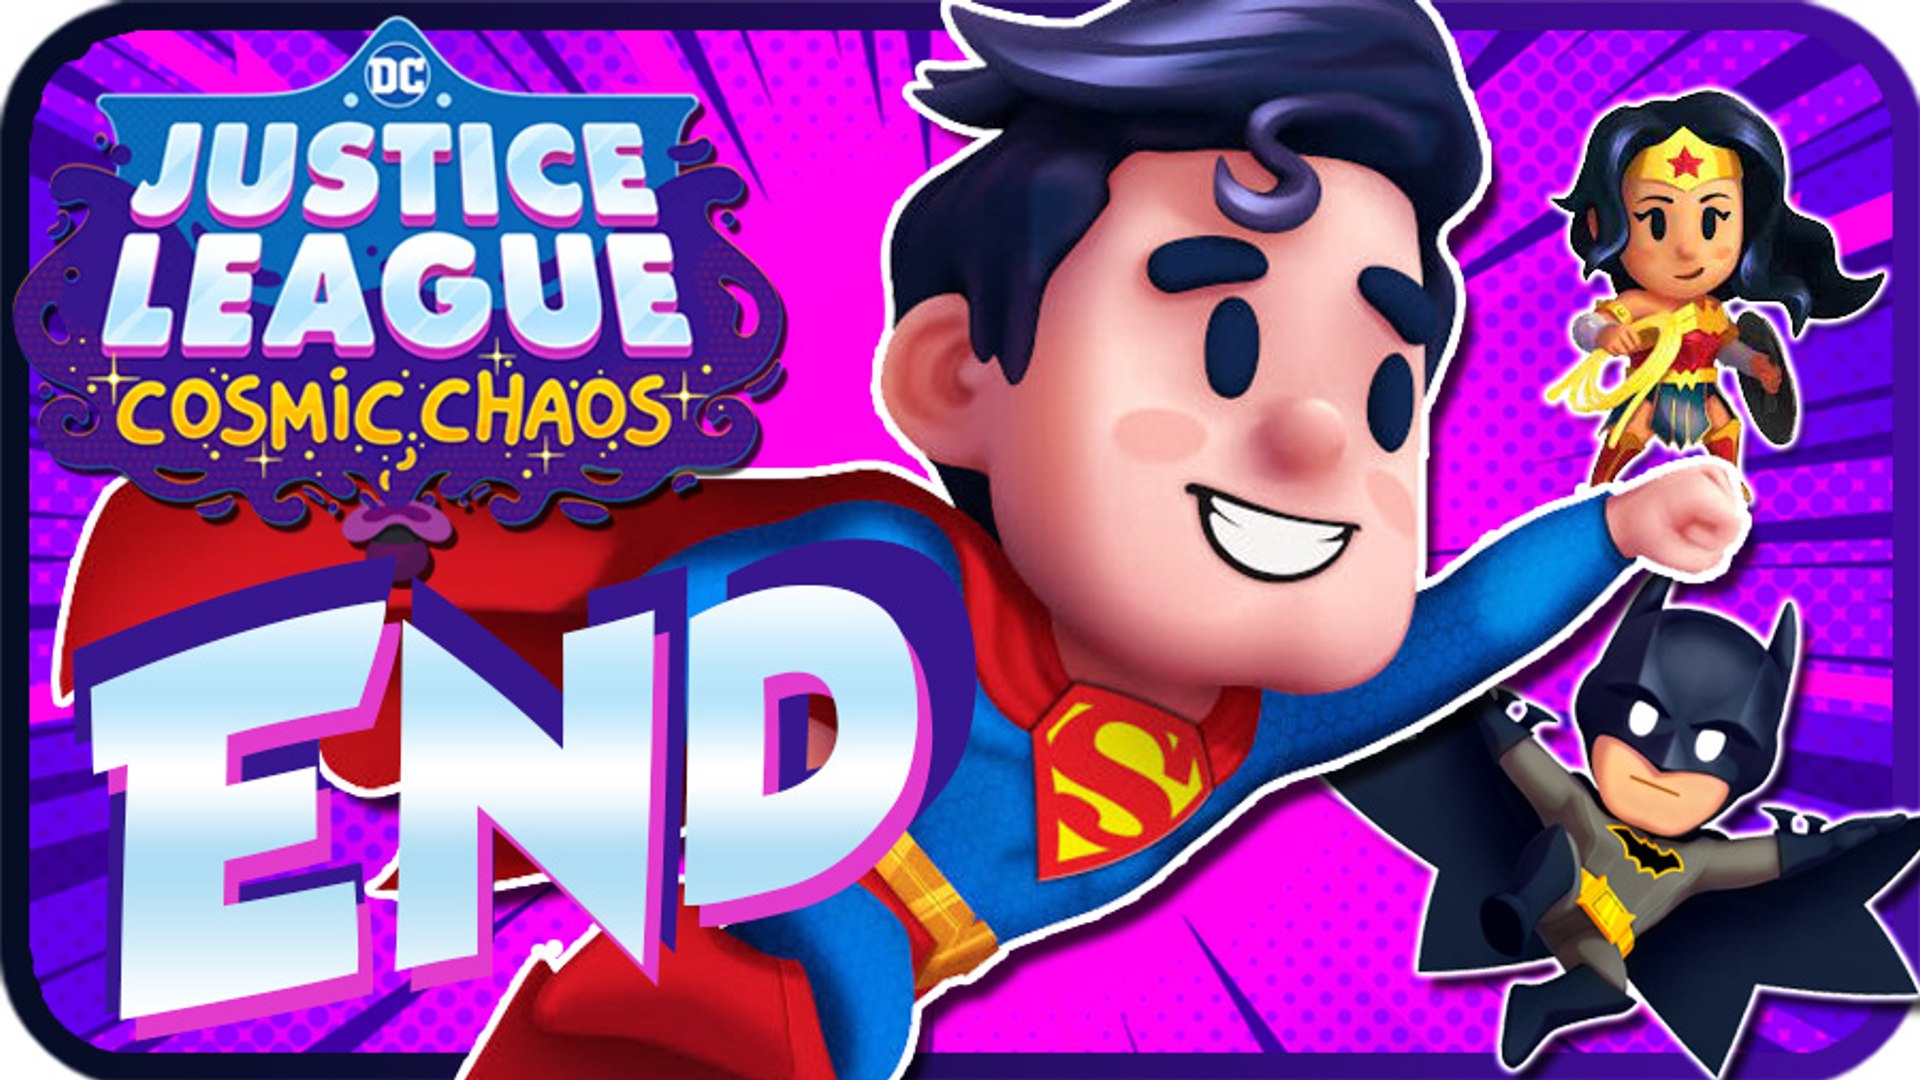  DC's Justice League: Cosmic Chaos - PlayStation 5